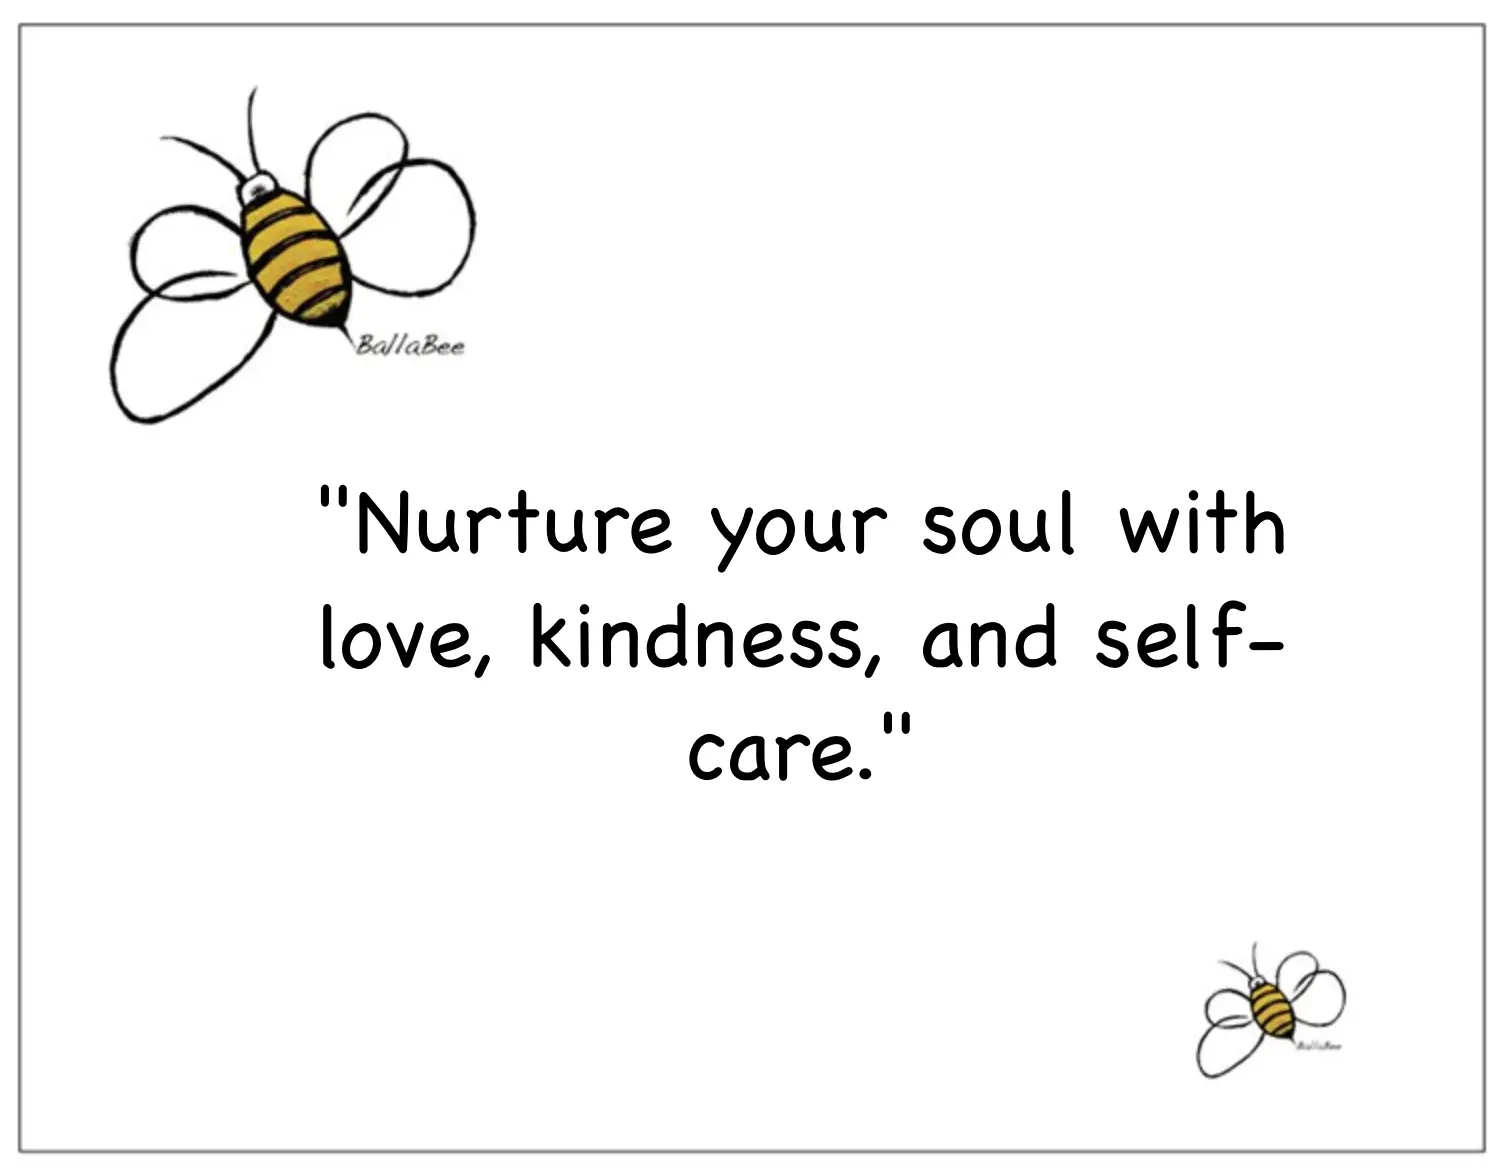 Nurture your soul with love, kindness, and self-care